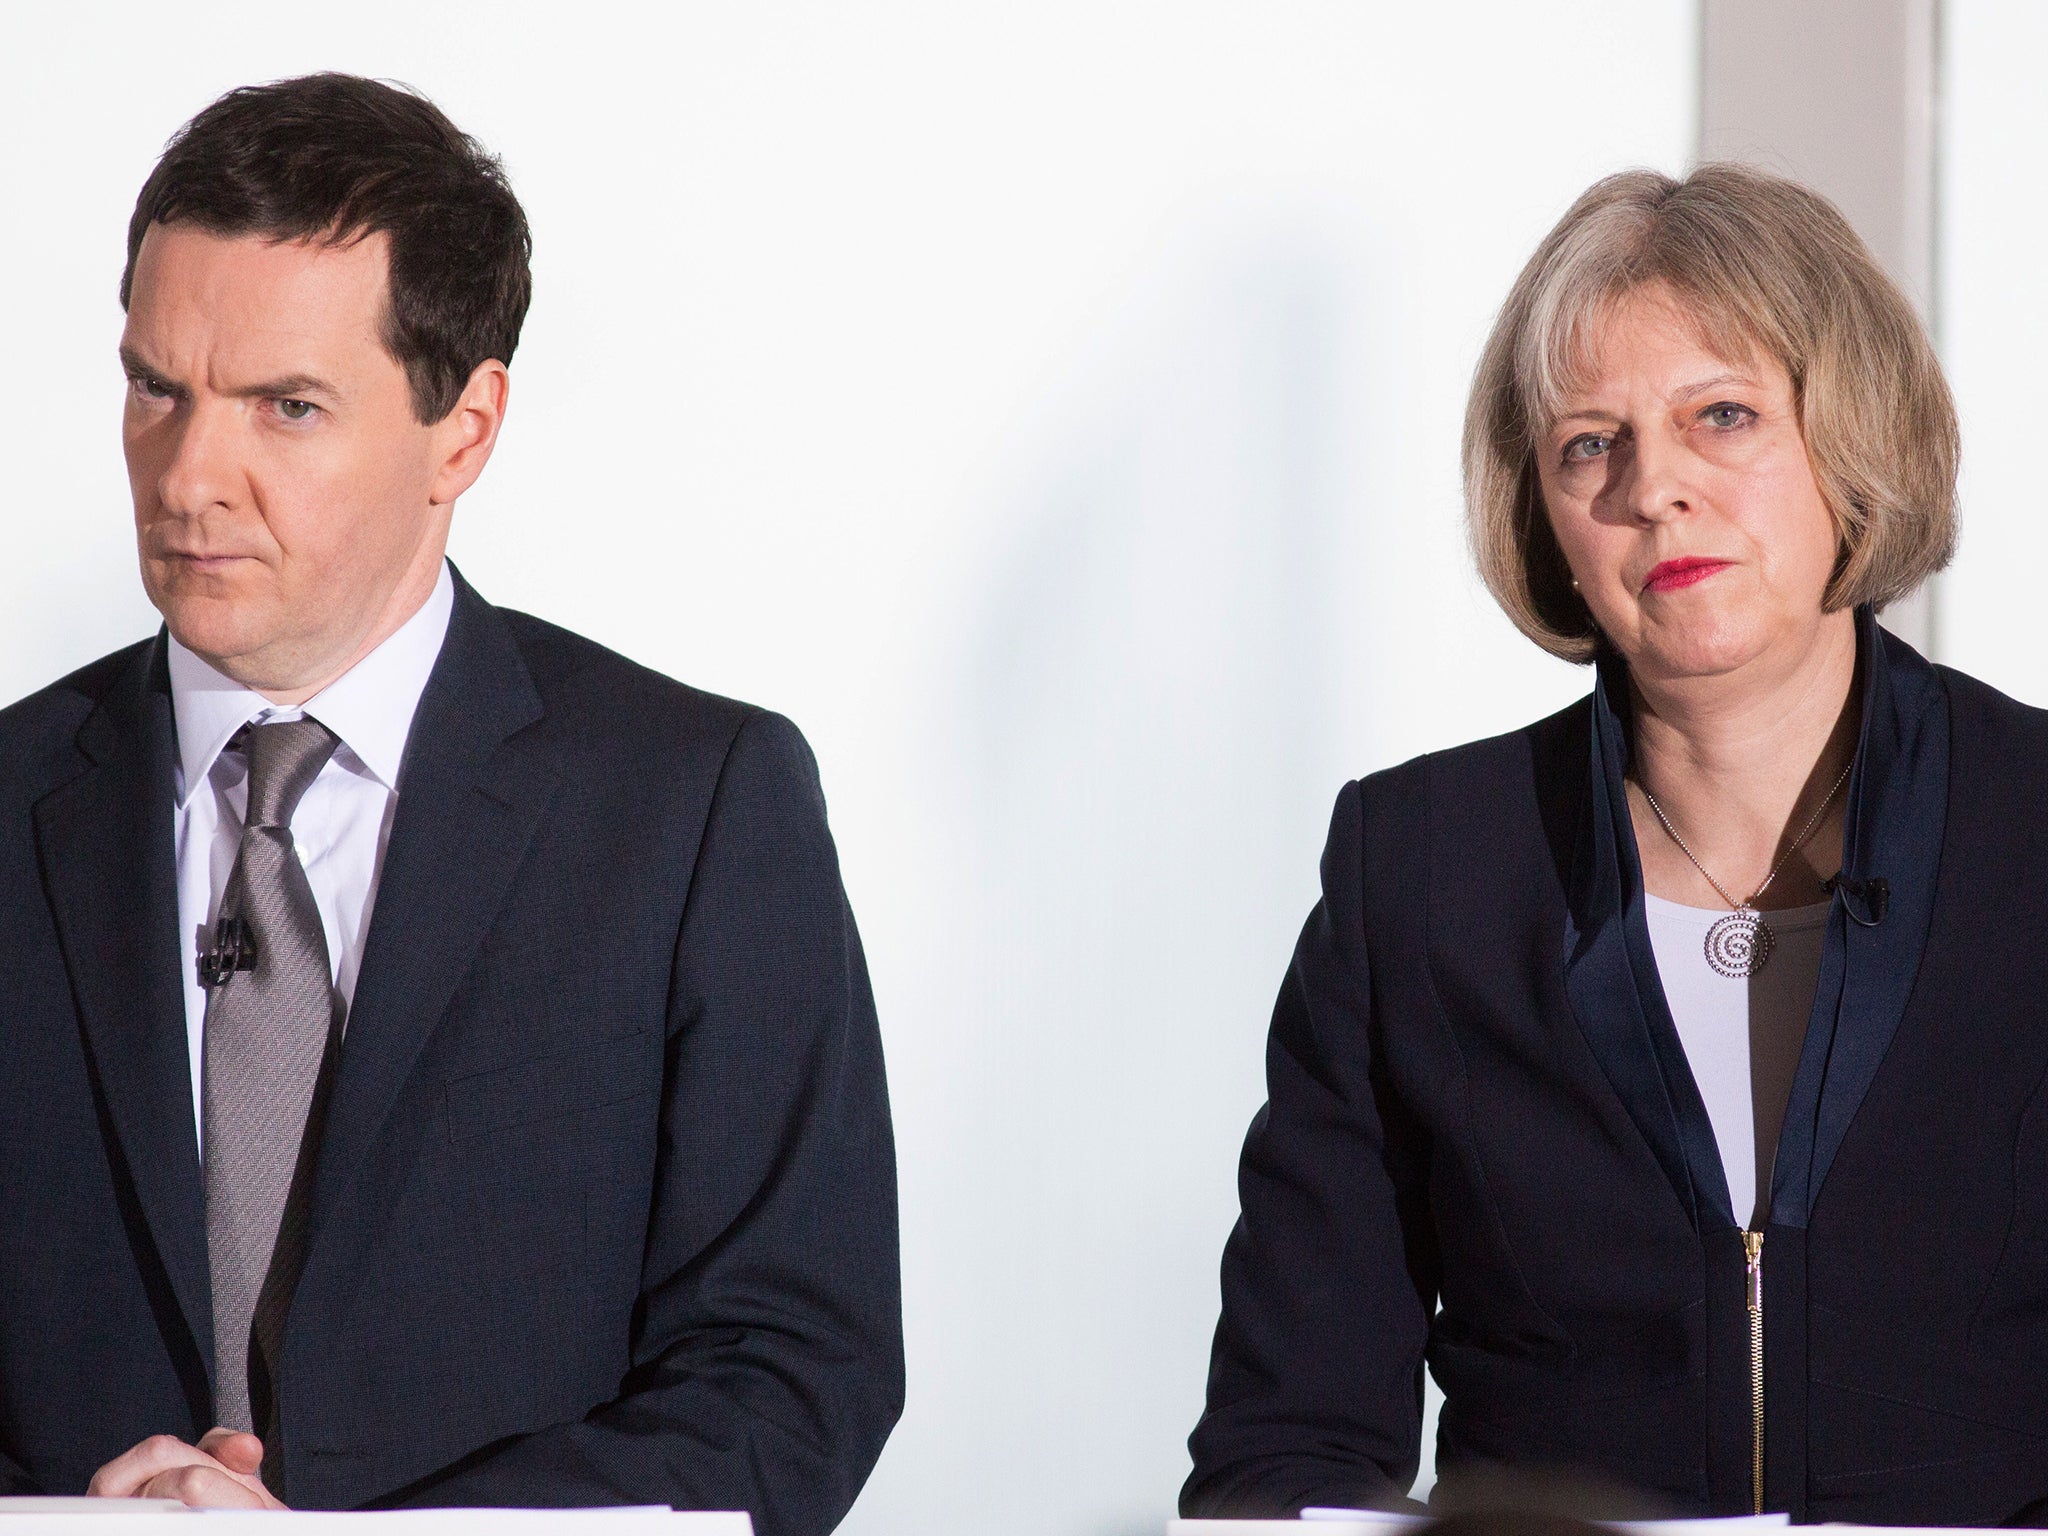 George Osborne and Theresa May have been tipped by Mr Cameron as possible successors (Getty)